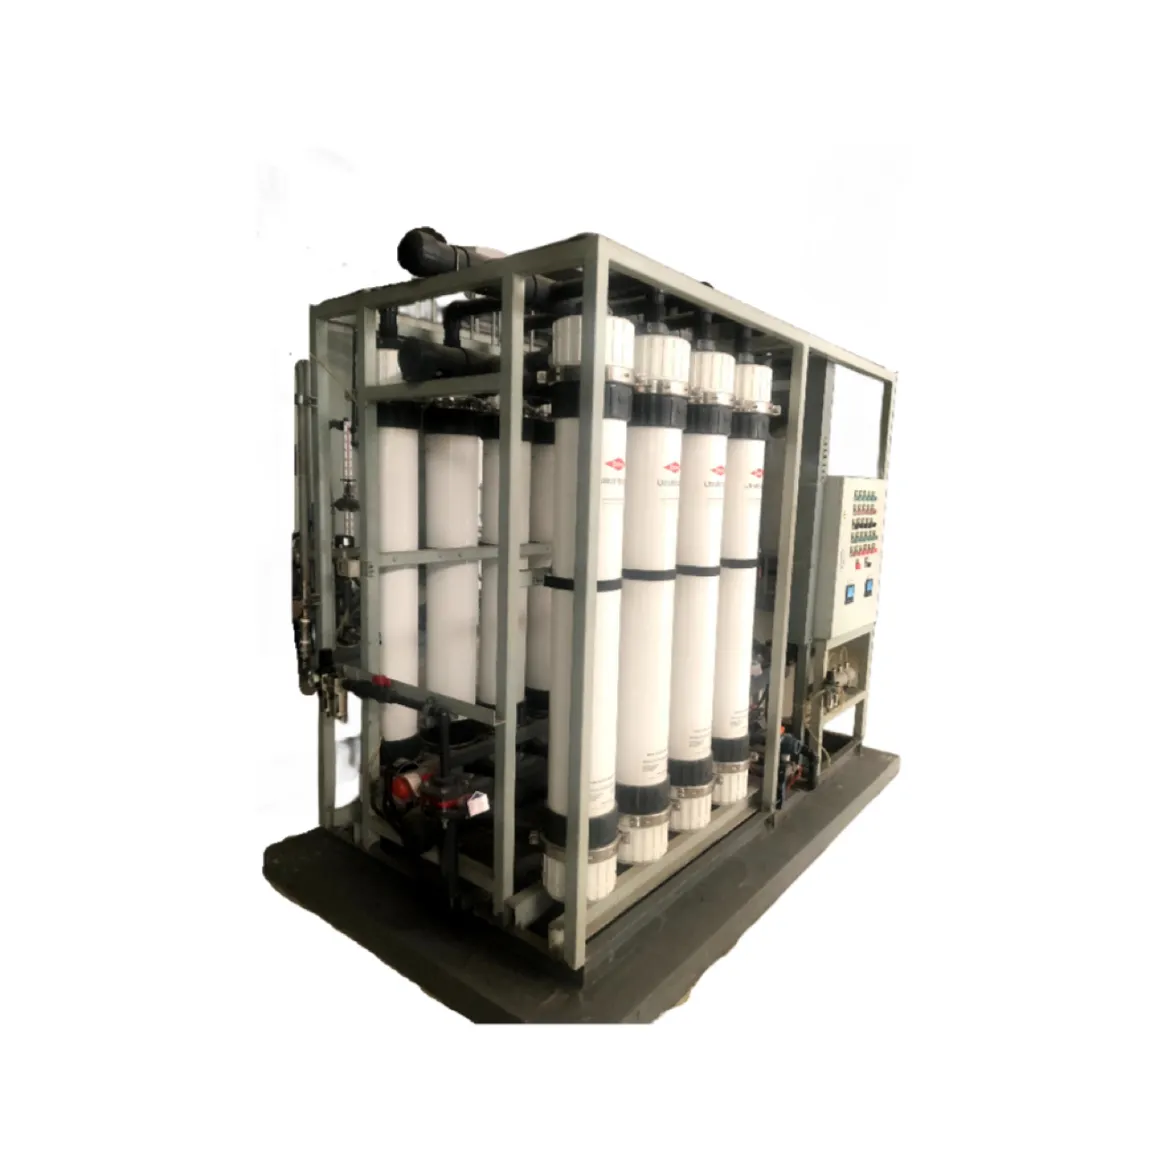 Manufacture Uf System Water Ultrafiltration Industrial Chemical Process Device Water Filter